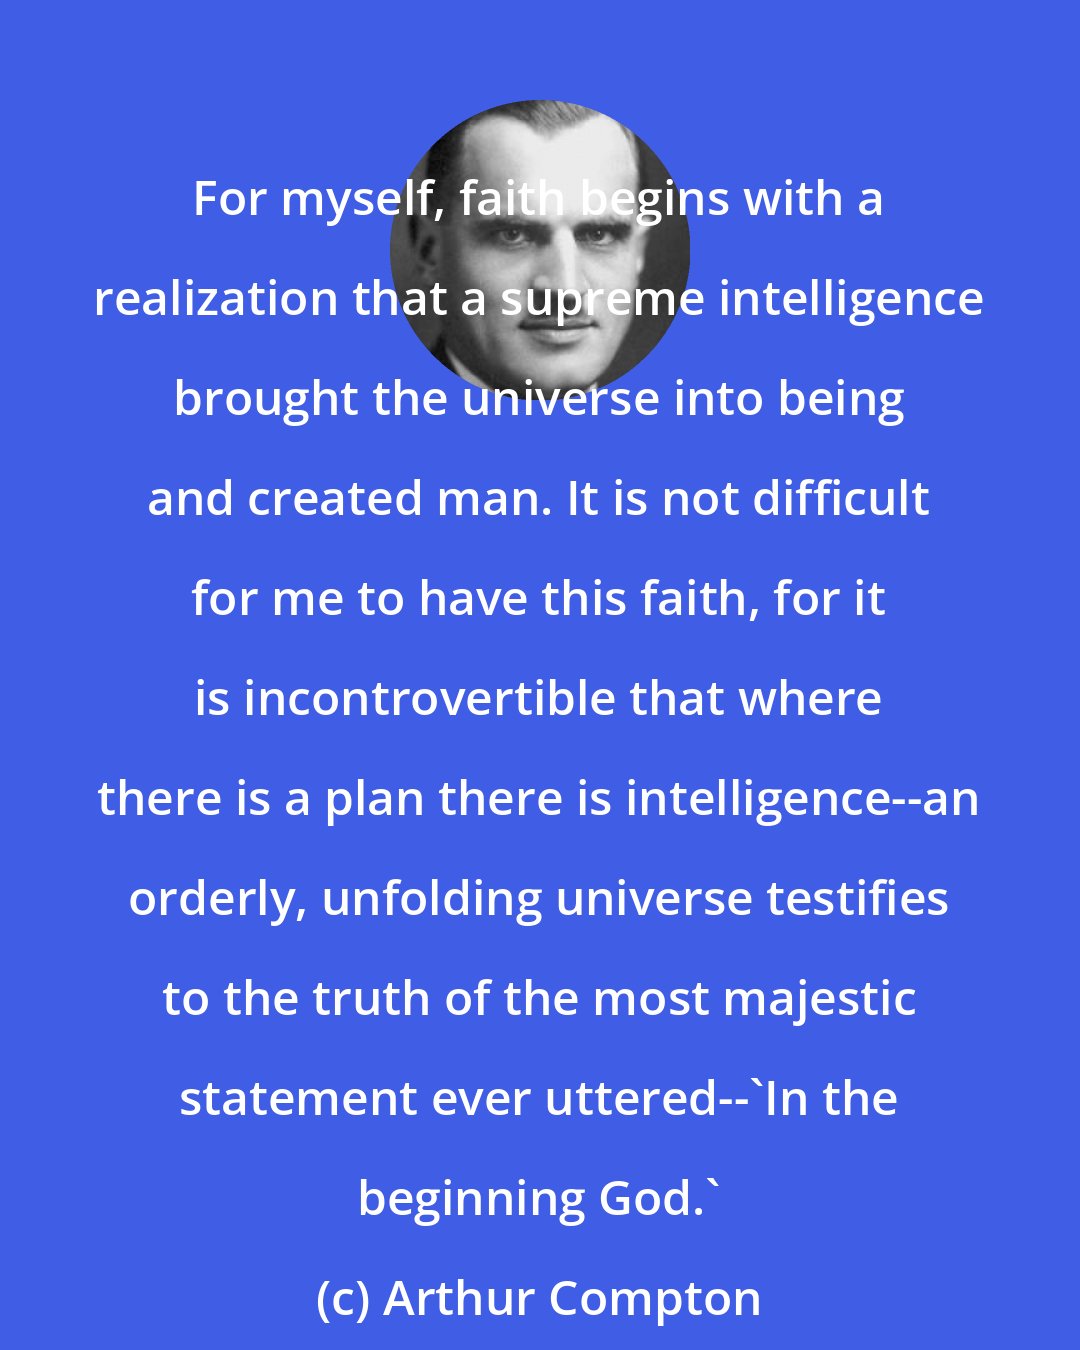 Arthur Compton: For myself, faith begins with a realization that a supreme intelligence brought the universe into being and created man. It is not difficult for me to have this faith, for it is incontrovertible that where there is a plan there is intelligence--an orderly, unfolding universe testifies to the truth of the most majestic statement ever uttered--'In the beginning God.'